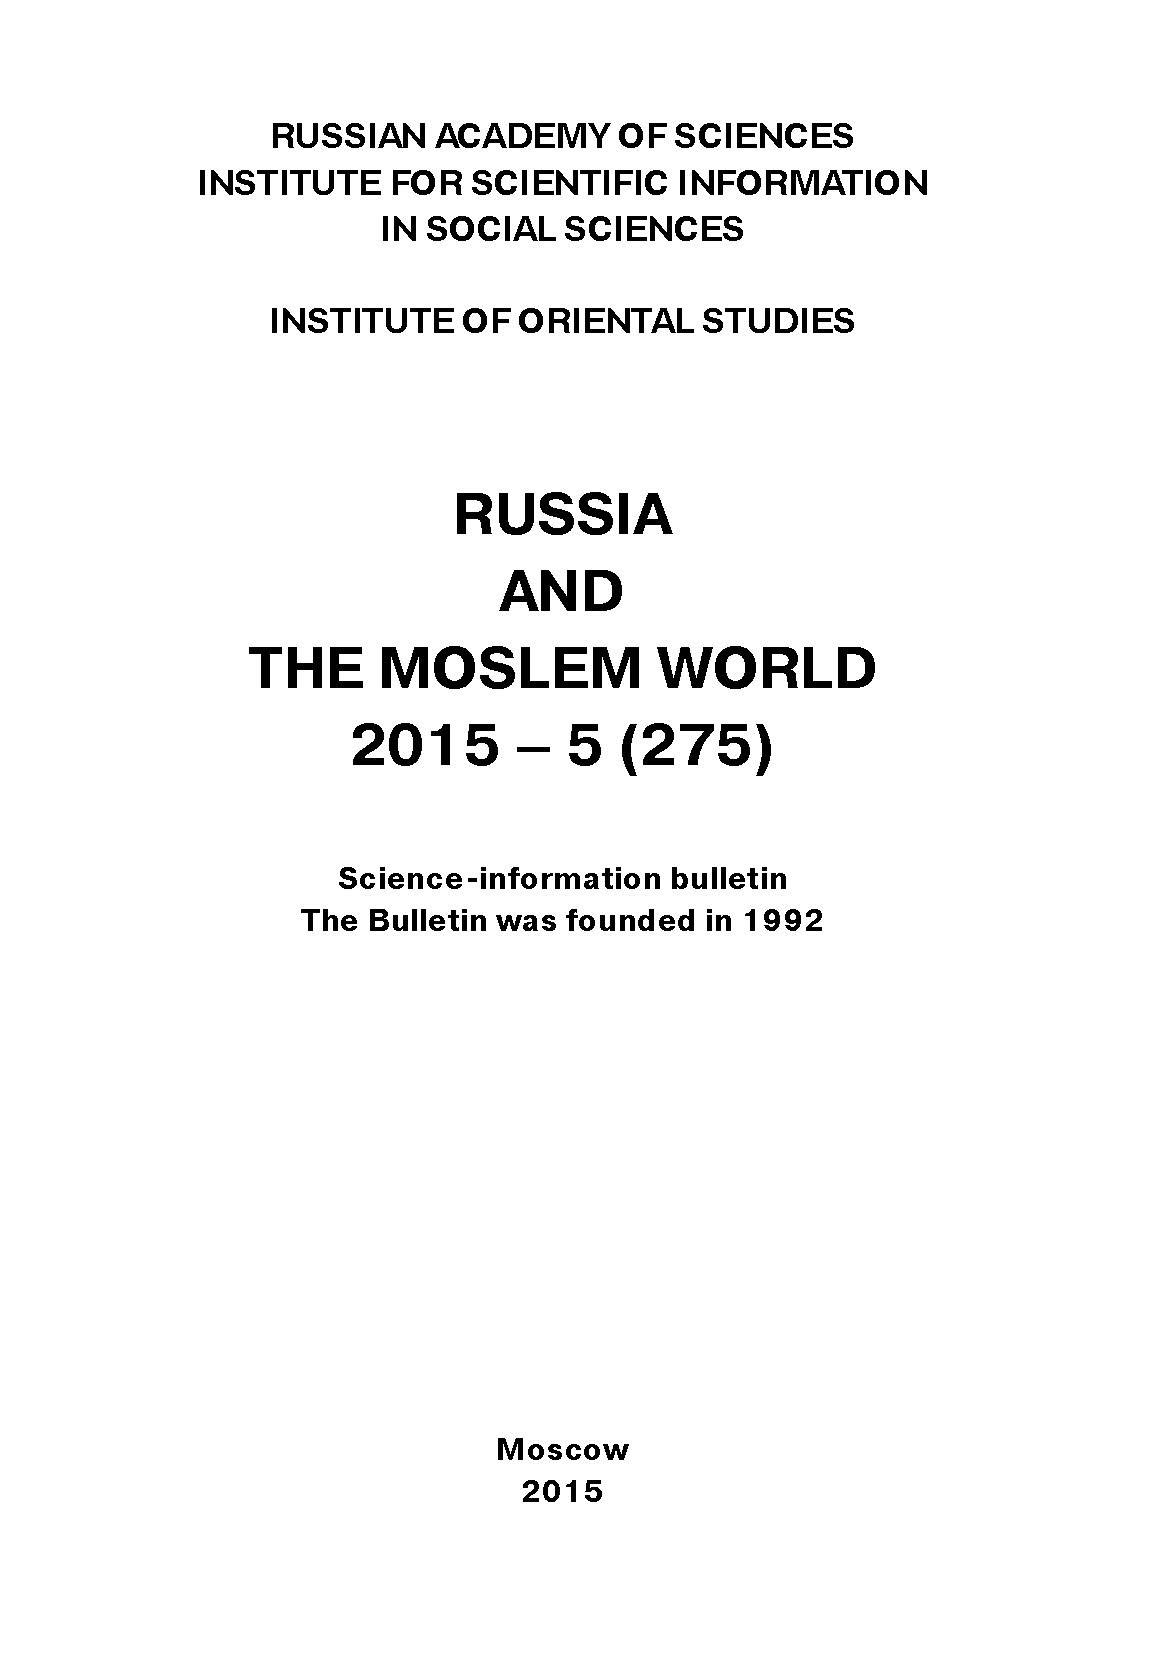 Russia and the Moslem World№ 05 / 2015